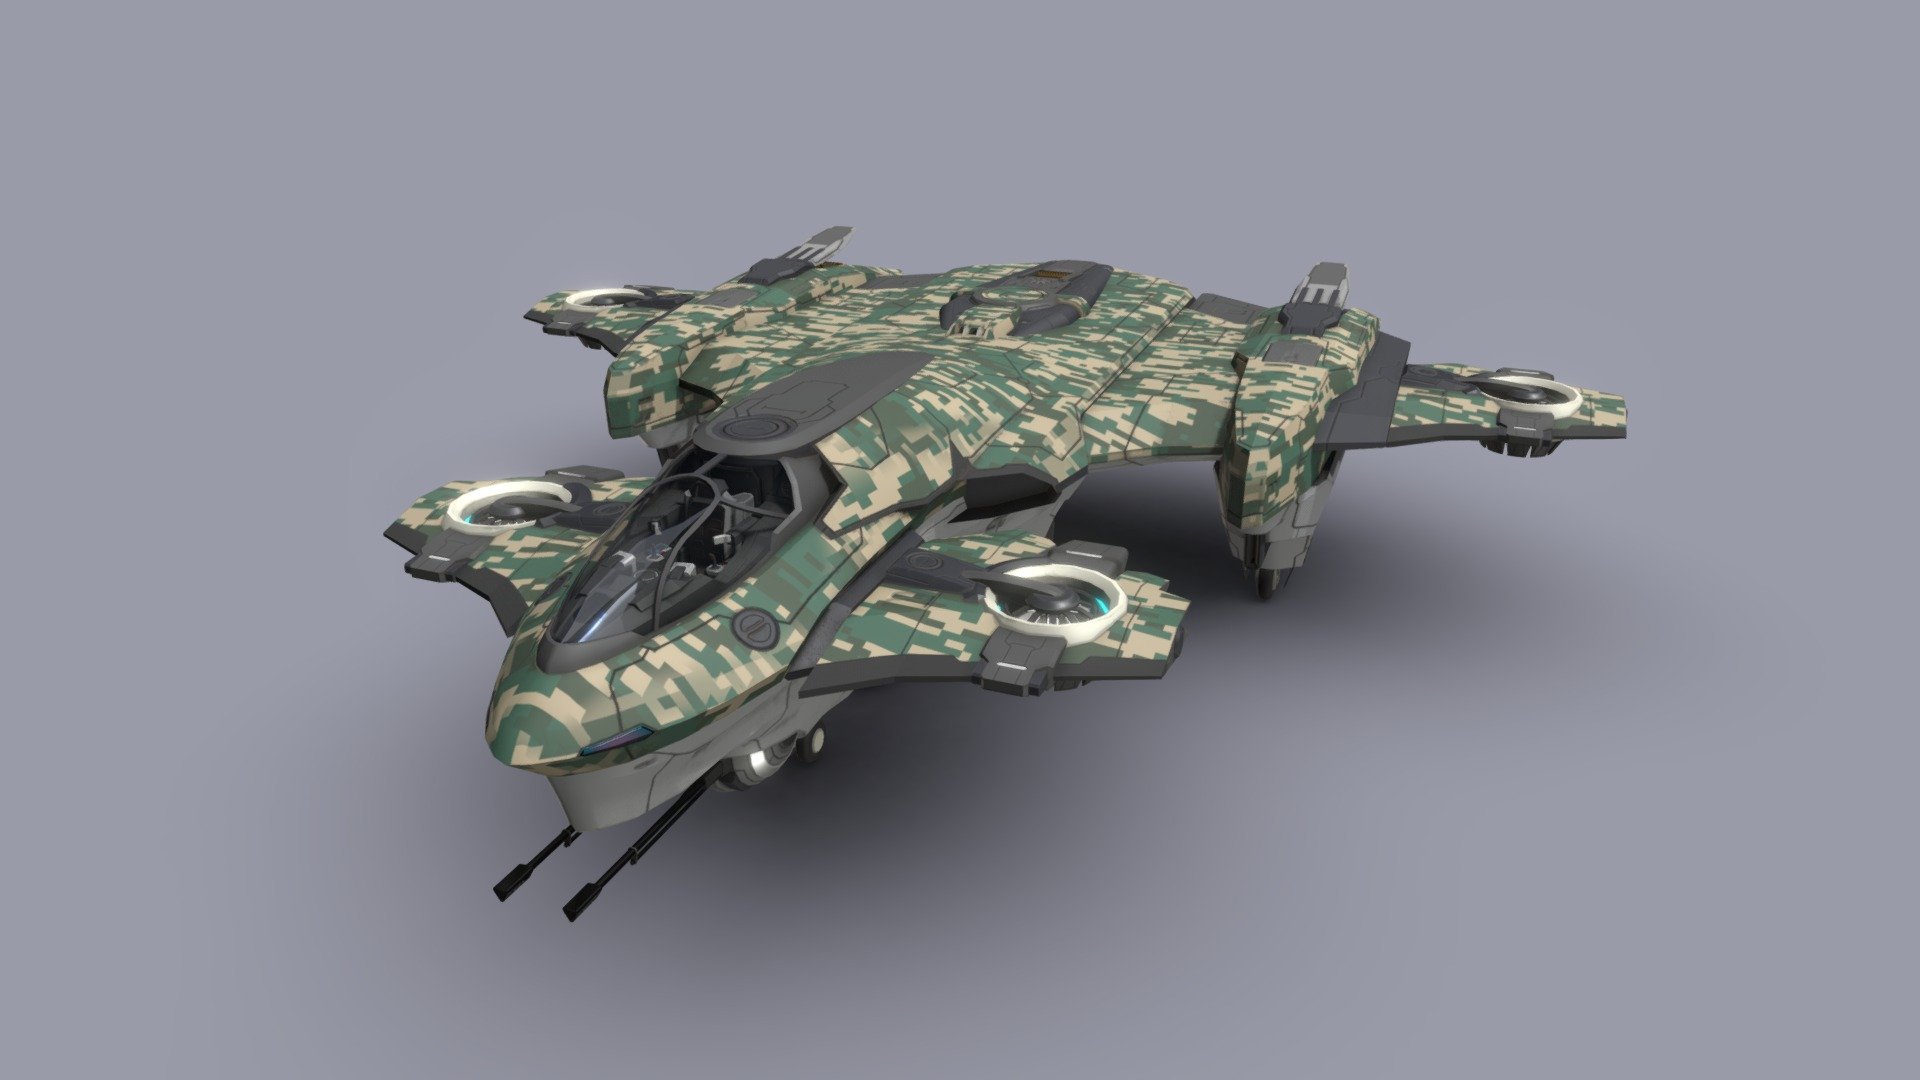 Based on an universal airframe concept, the Heavy VTOL gunship, commonly nicknamed Luftpanzer, is the configuration designed specifically to carry out ground attack against fortifications, infrustractures, and in the case of orbital combat operation, against capital ships. With a crew of 2 and an onboard small living quarter providing reasonable human comfort, this gunship is capable of prolonged cruise without the need of carriers, thus massivly reducing the logistic need for a combat fleet without sacrifising on firepower. Thanks to its root in the universal airframe concept, the aircraft can be easily converted to cargo ship or bomber by replacing the railgun module. It is even possible to convert this aircraft into a small carrier with either parasite fighters or attack drones. The flexibility of the airframe earned well-deserved popularity among PMCs and mercenaries 3d model